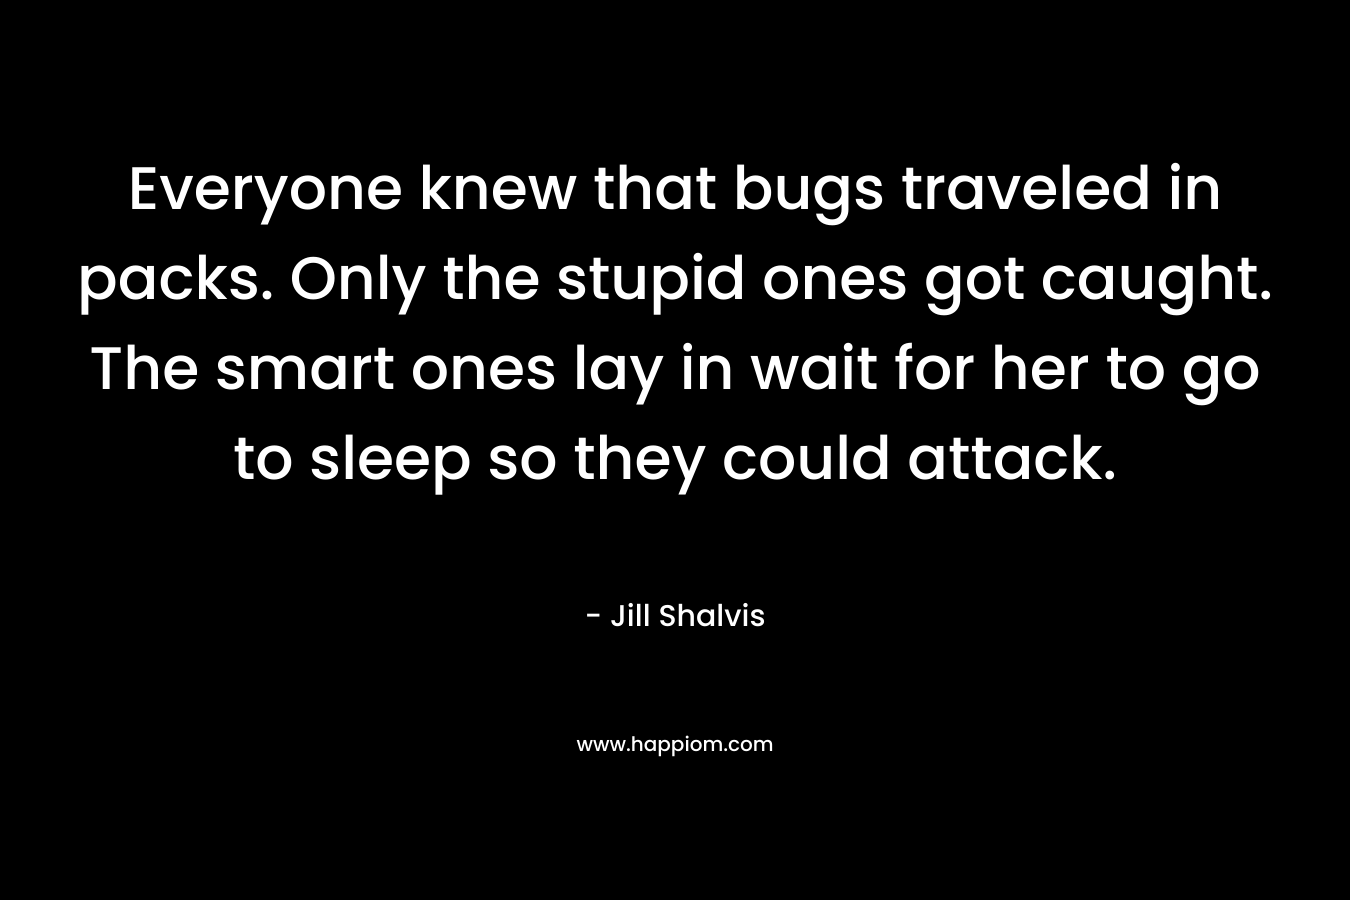 Everyone knew that bugs traveled in packs. Only the stupid ones got caught. The smart ones lay in wait for her to go to sleep so they could attack.